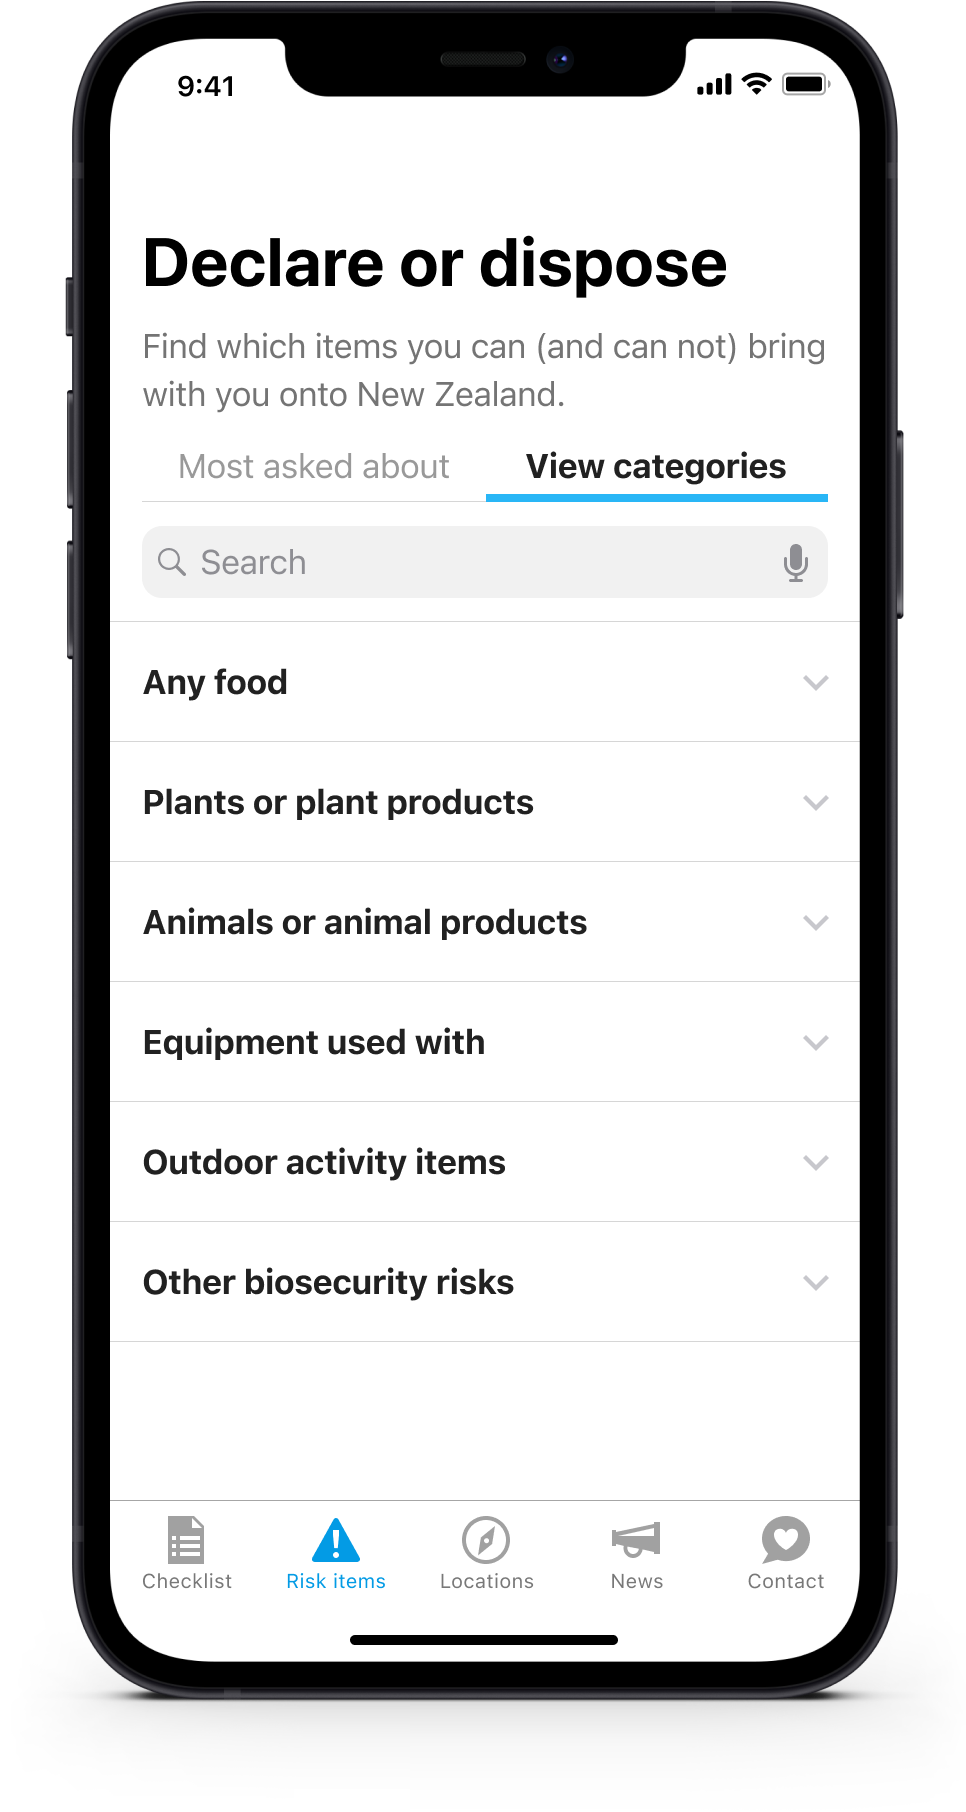 Coming to New Zealand risk items view categories